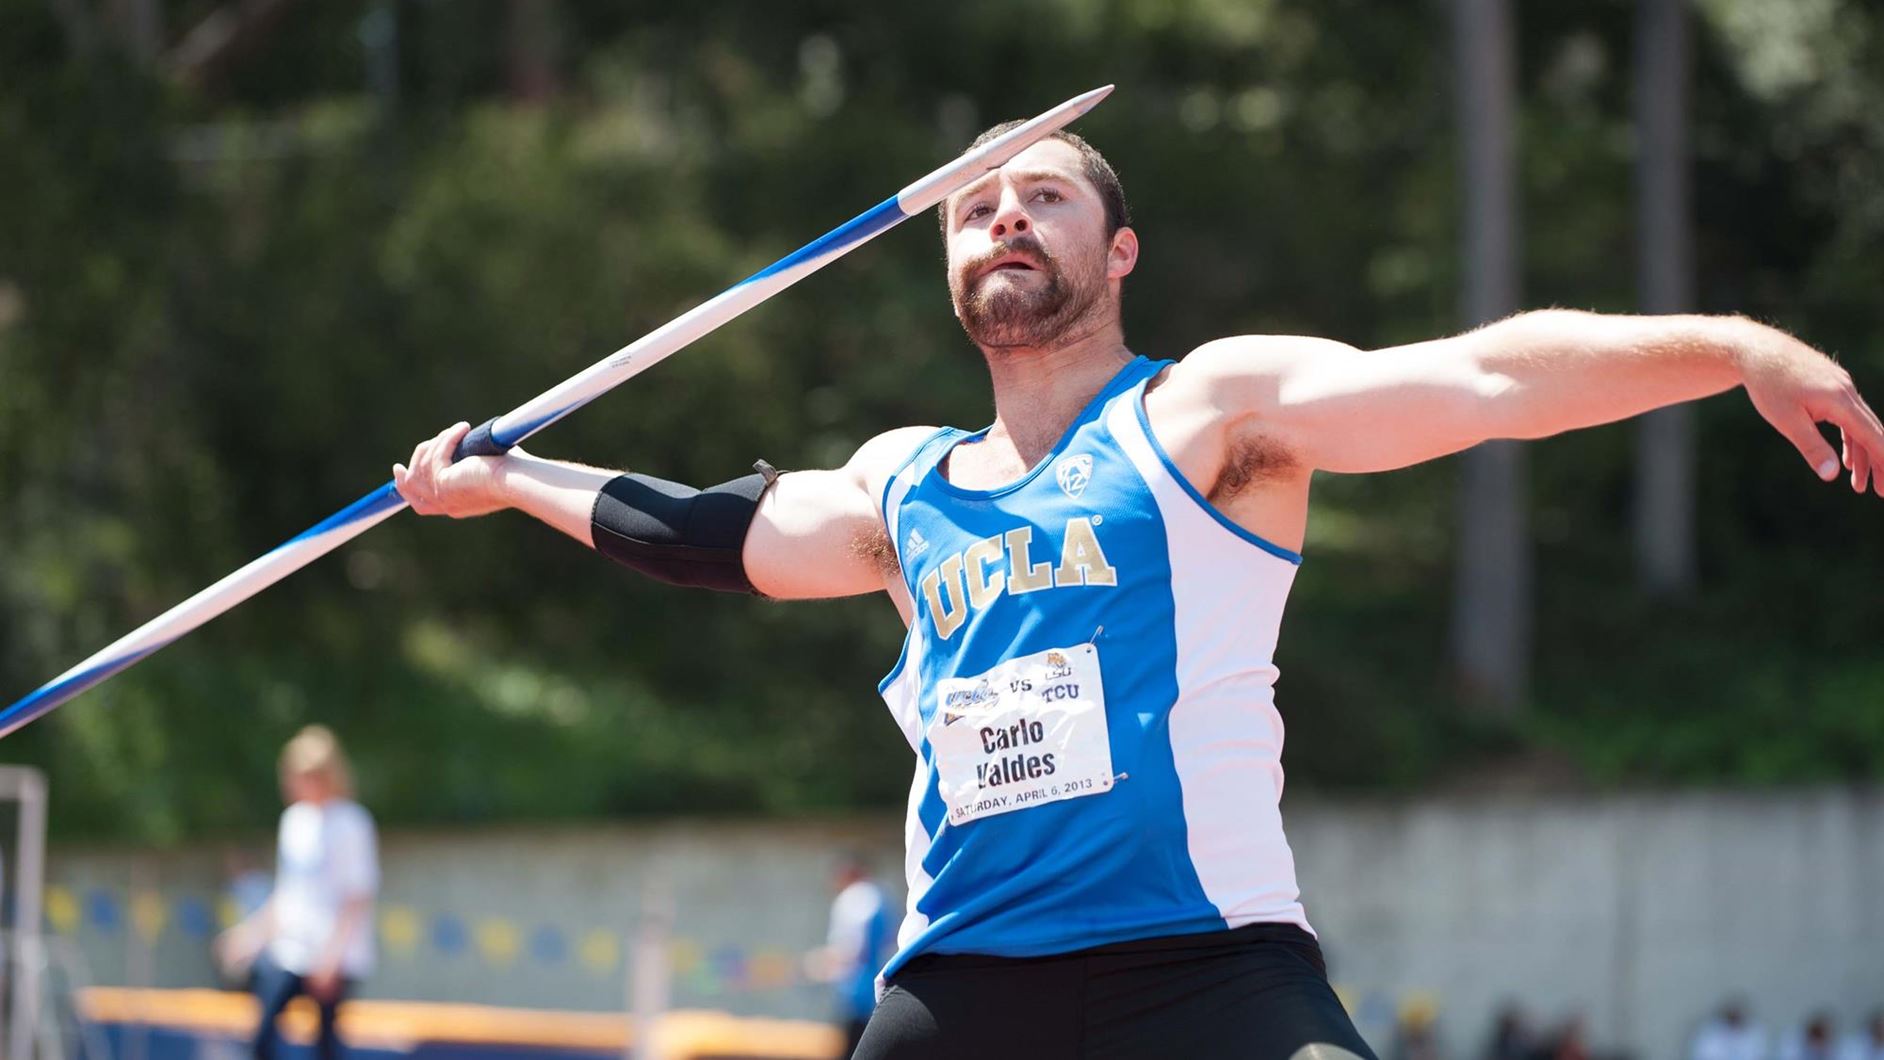 Carlo Valdes throws the javelin while at UCLA